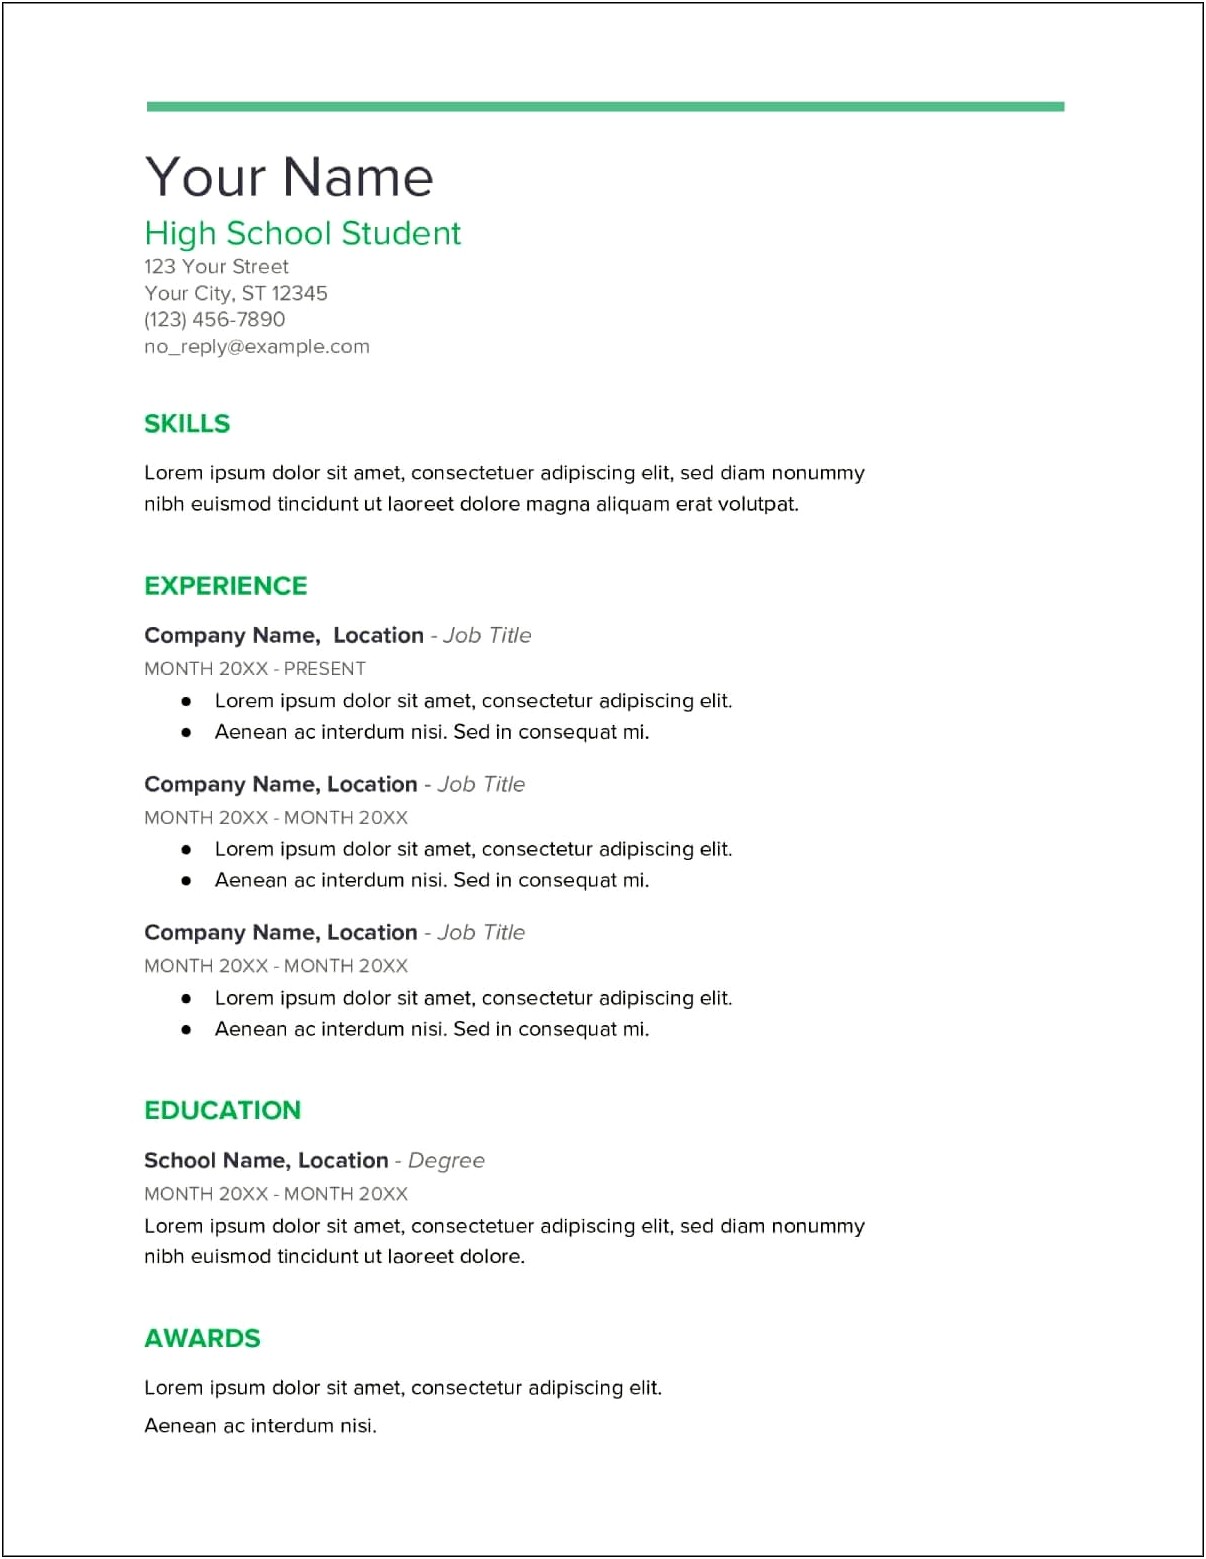 Writing A Resume As A High School Student